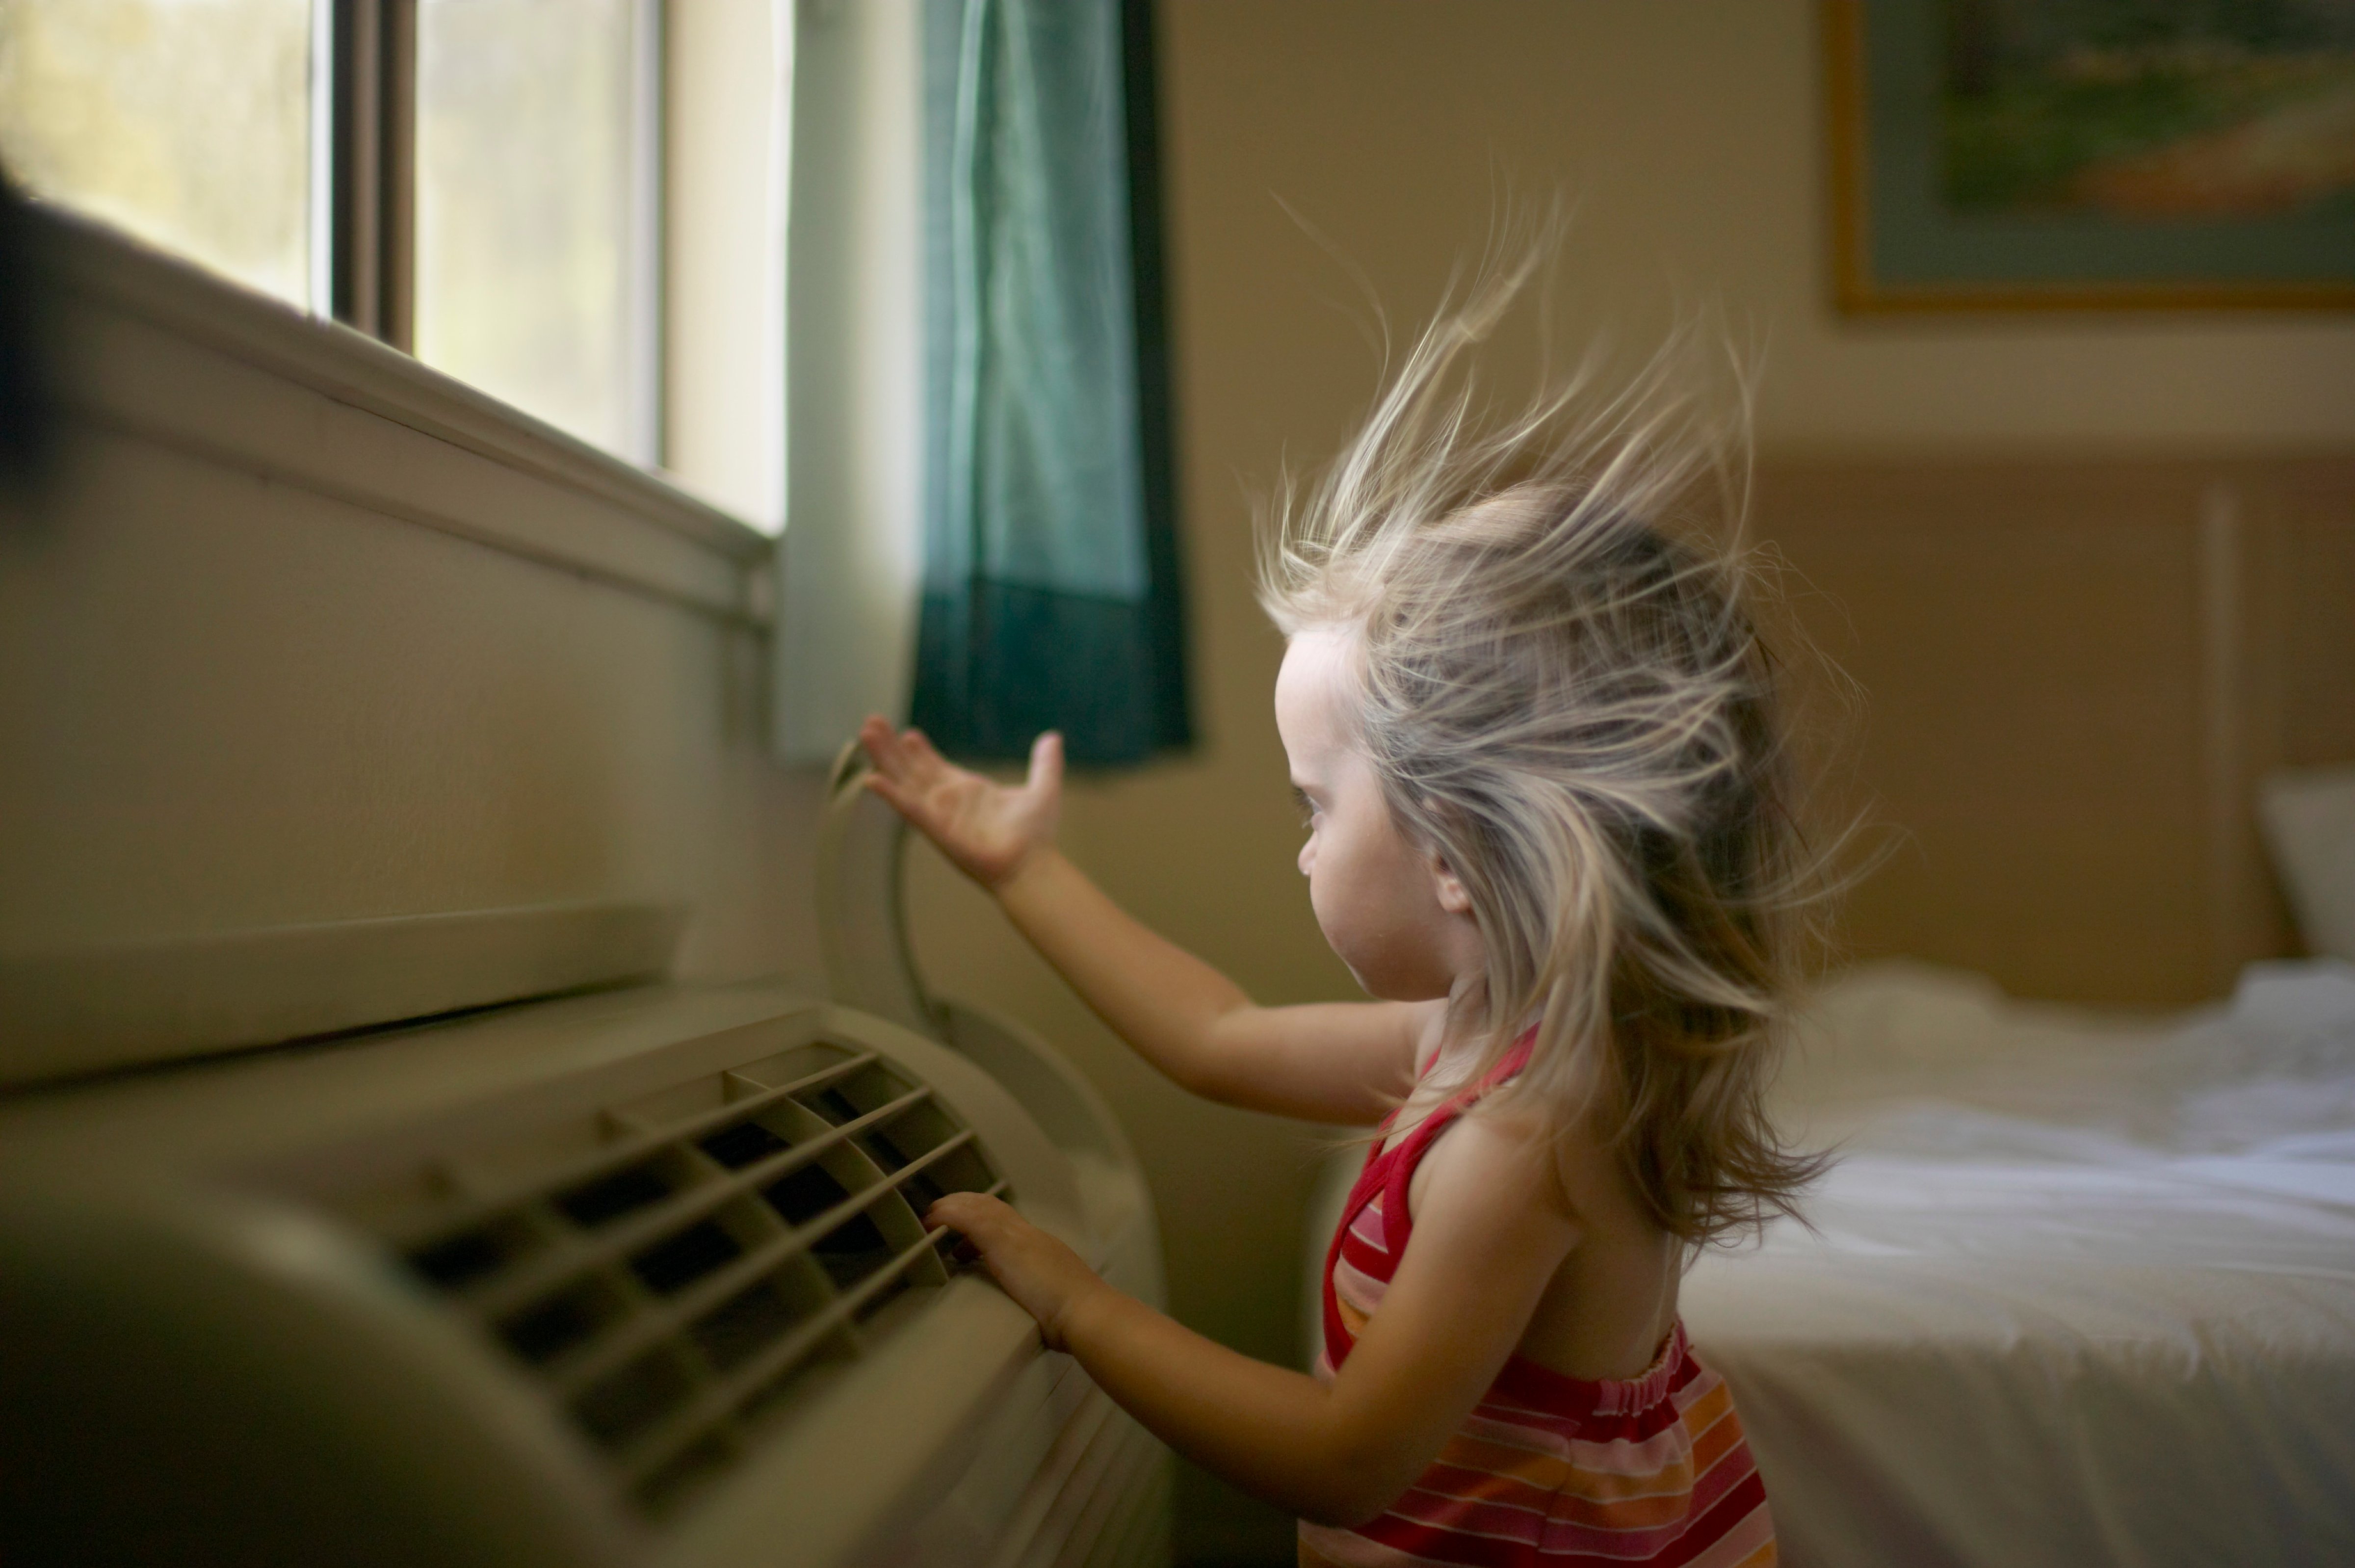 Toddler (21-24 months) feeling air coming from room airconditioner